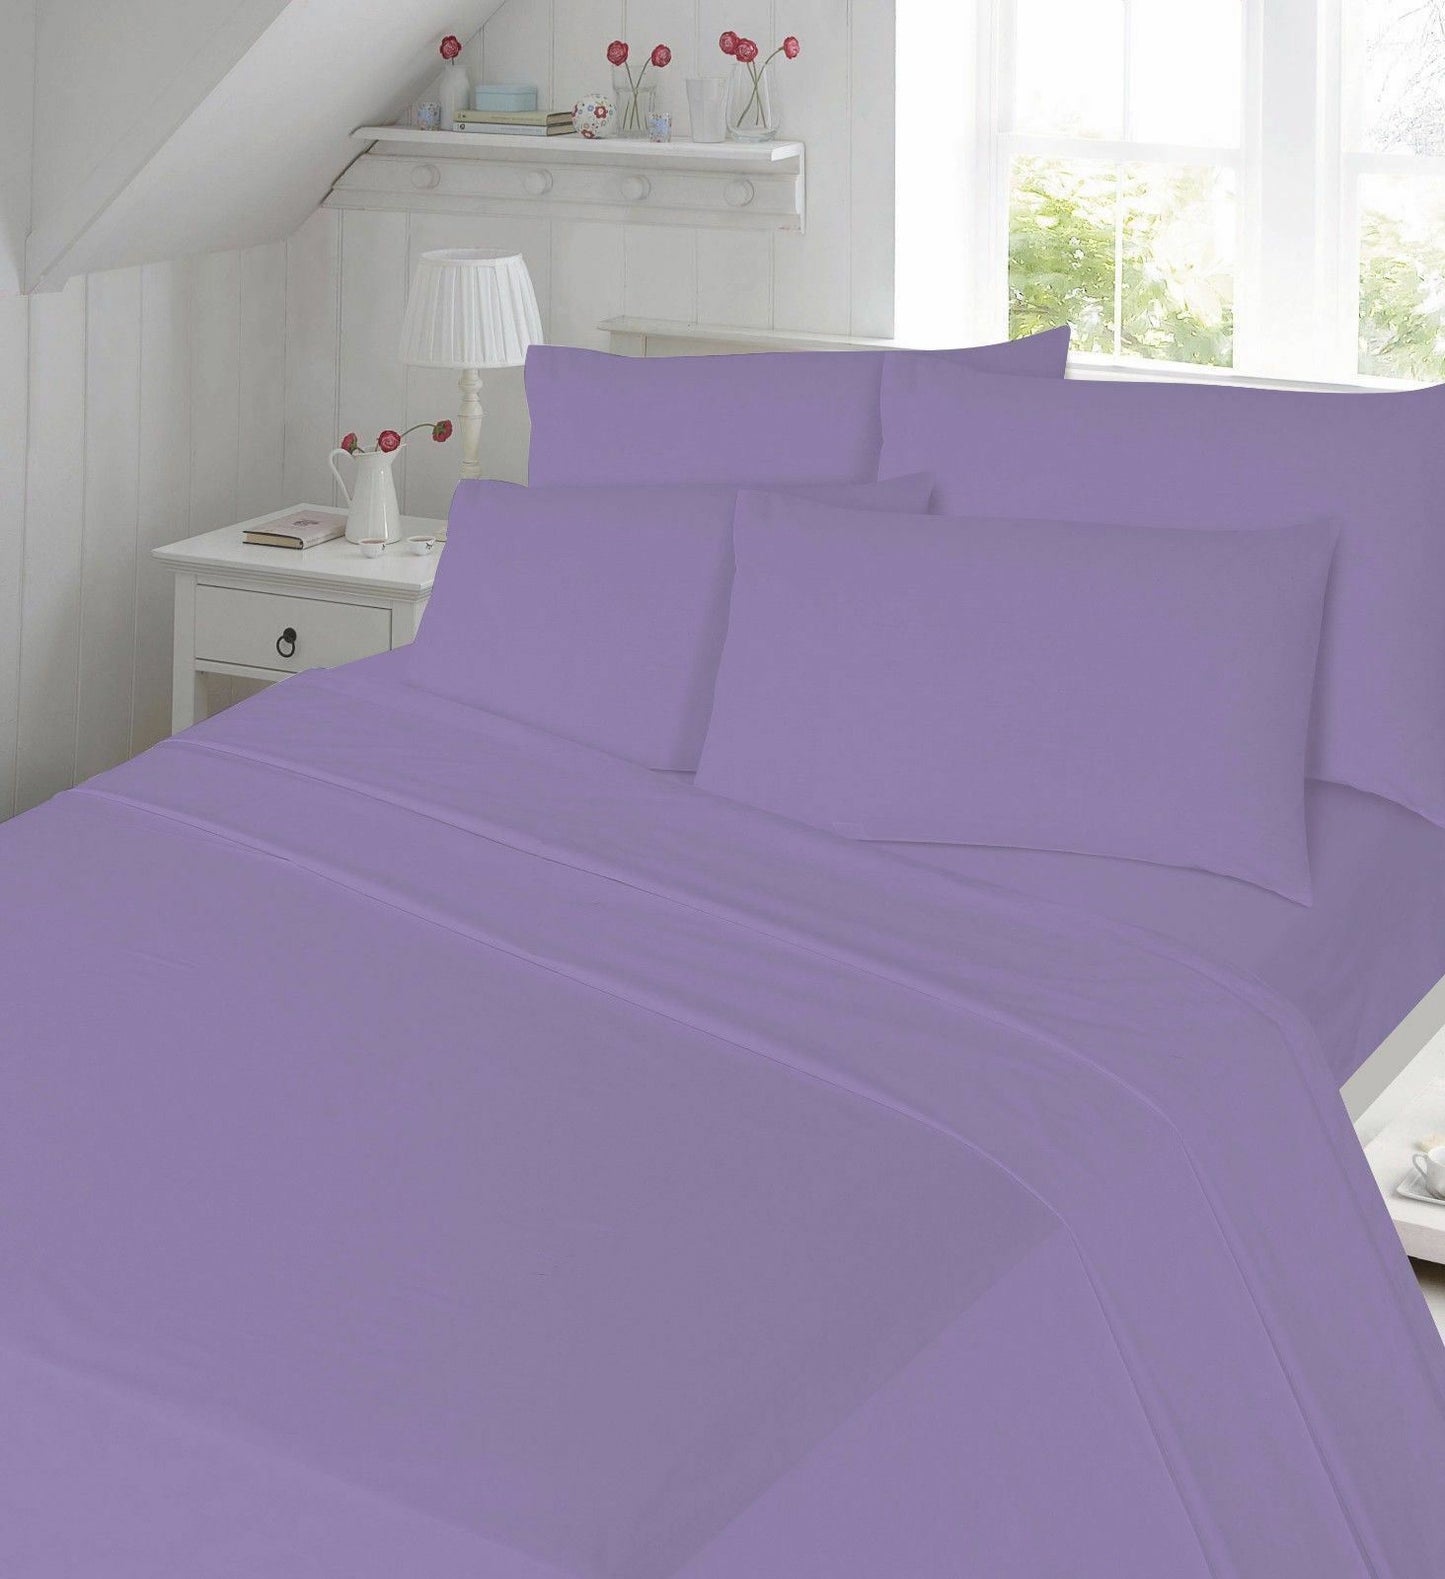 100% Brushed Cotton Pillowcase Cover Pair - TheComfortshop.co.ukPillow Case0721718954989thecomfortshopTheComfortshop.co.ukFLNT Pillow Case Pair NZ-LilacLilac100% Brushed Cotton Pillowcase Cover Pair - TheComfortshop.co.uk